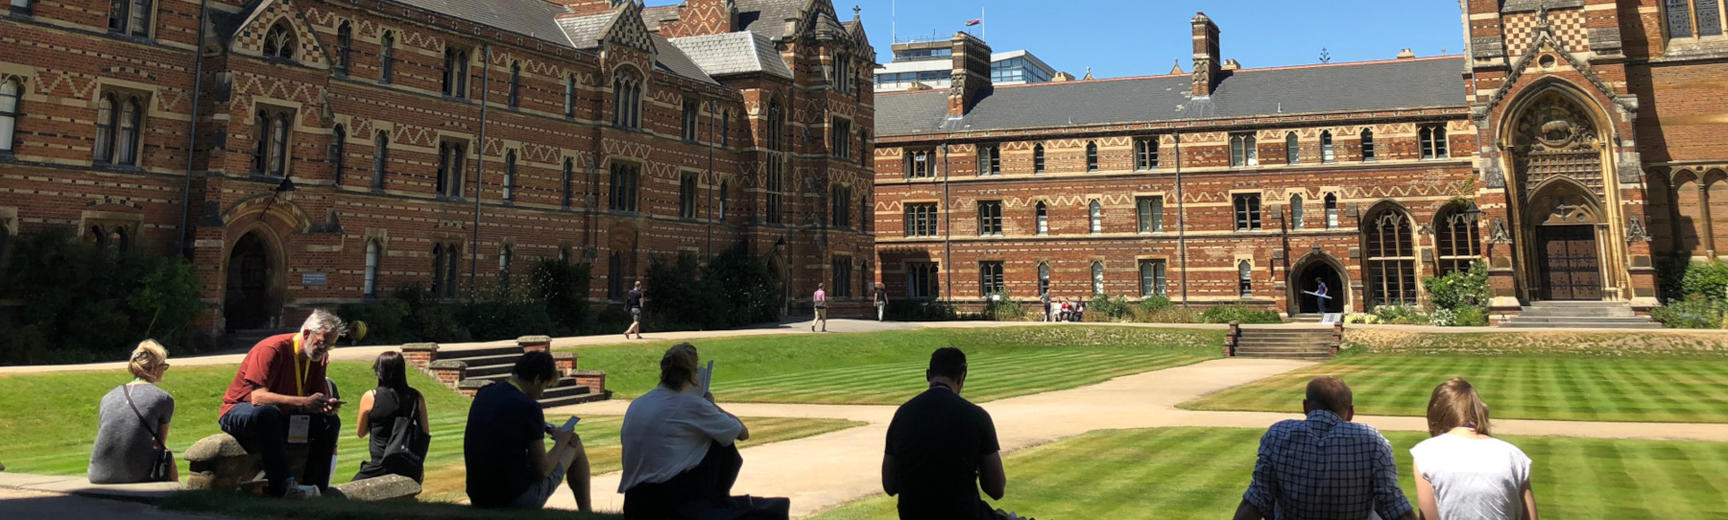 Attendees of the Digital Humanities @ Oxford Summer School relax at Keble College